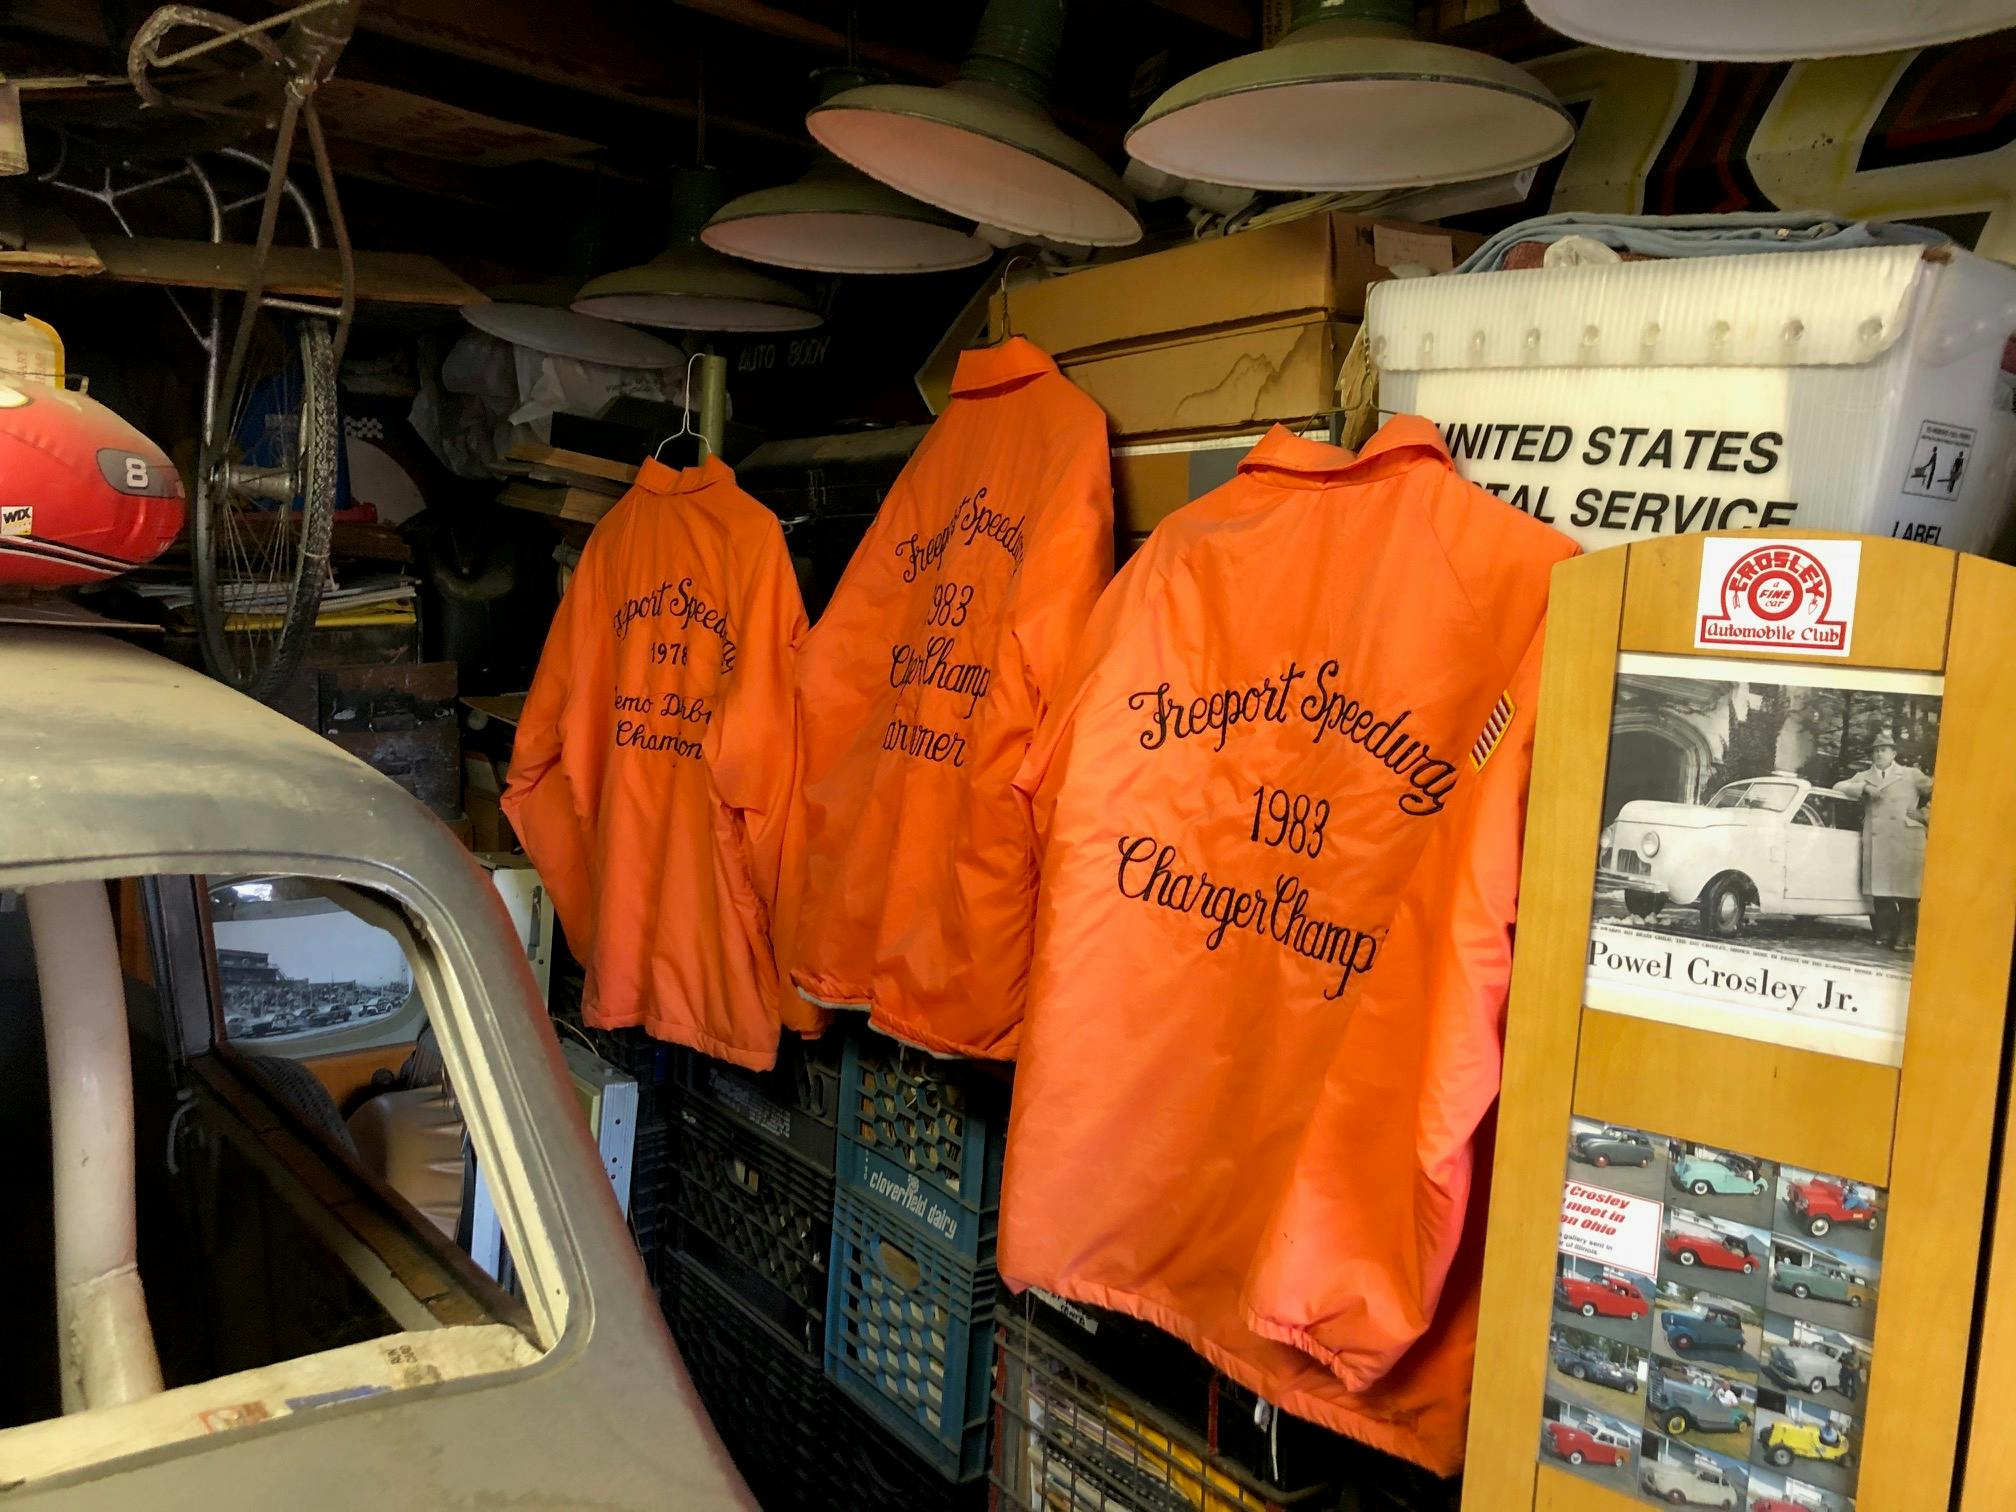 Himes Museum racing team jackets